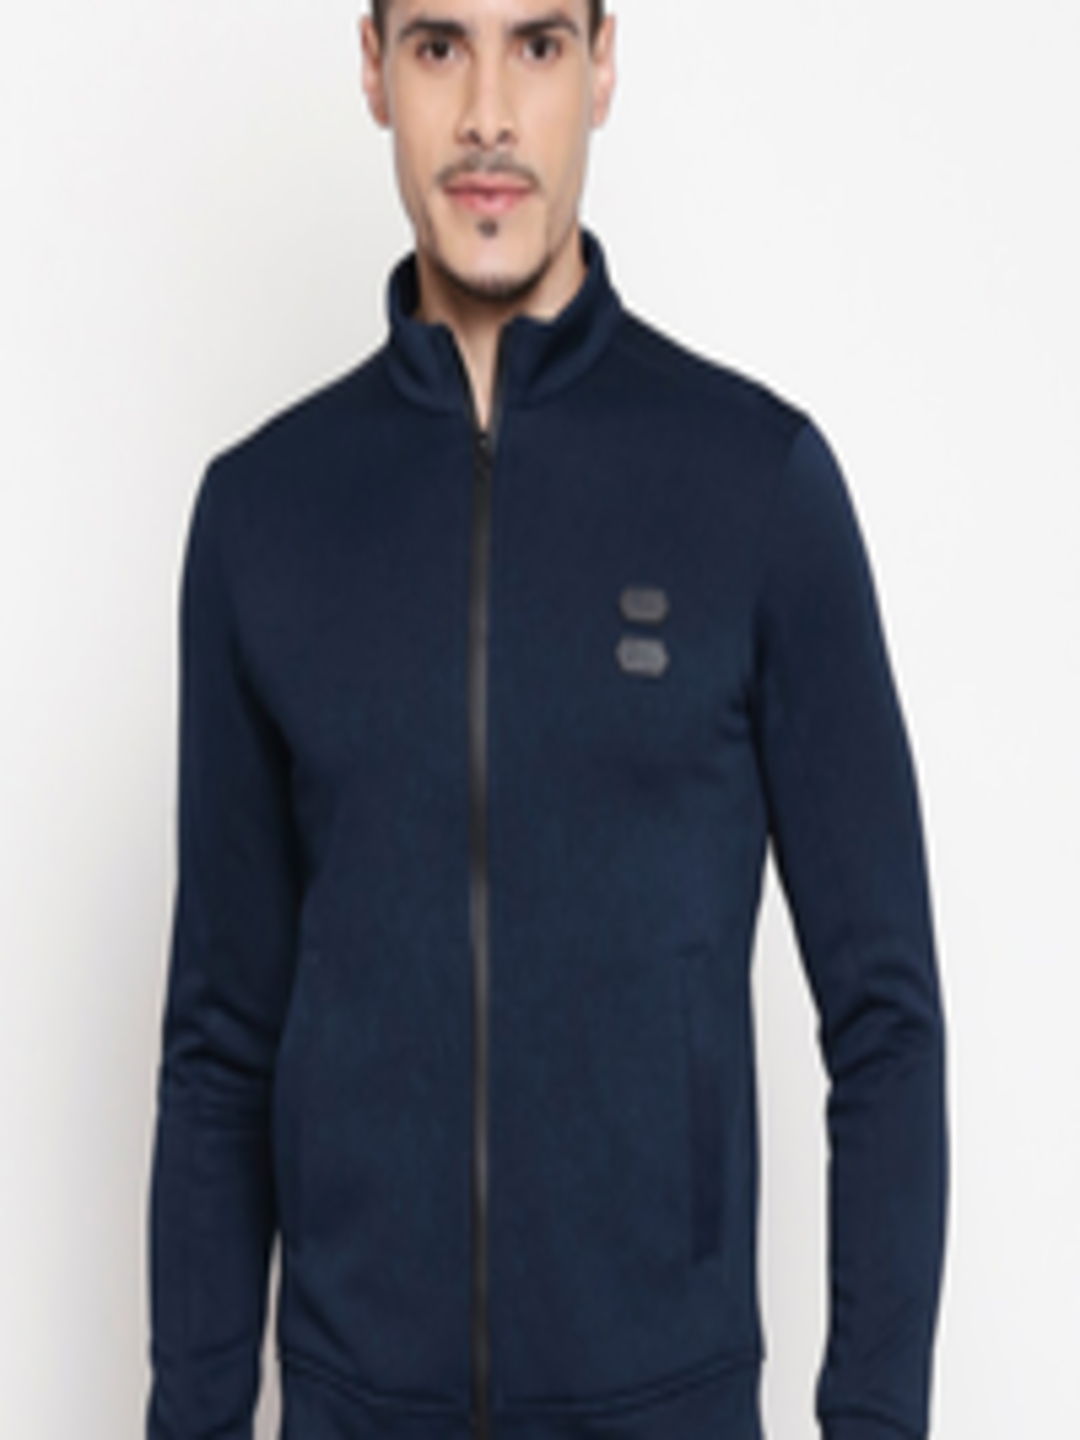 Buy Mufti Men Teal Solid Sporty Jacket - Jackets for Men 13208406 | Myntra